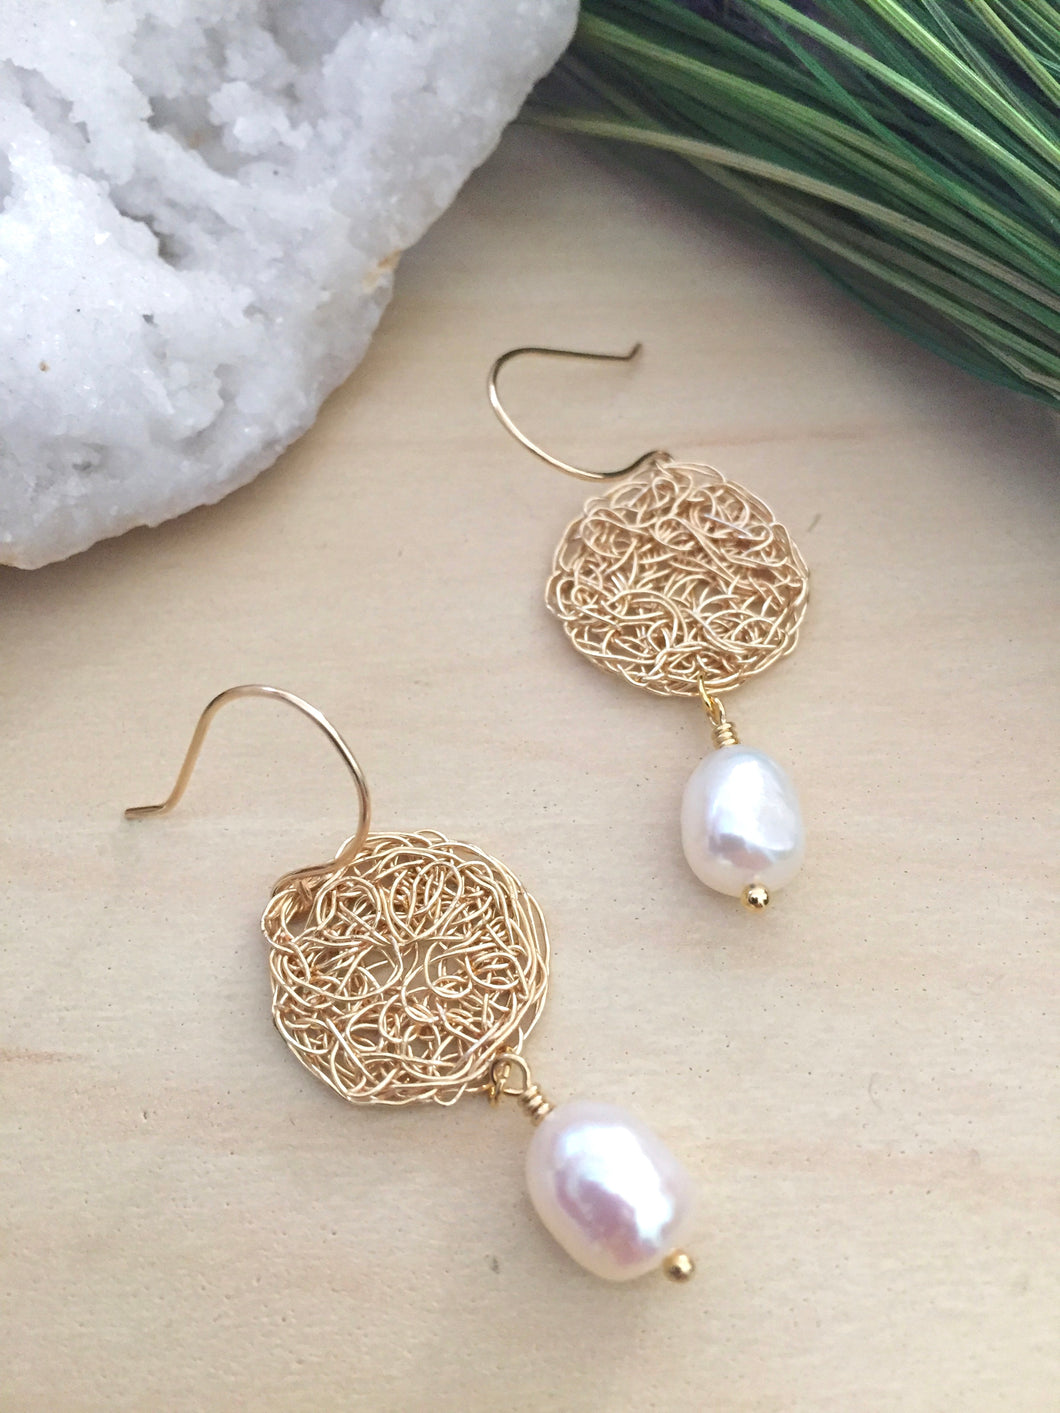 Top view of Round gold filigree disc earrings with a white freshwater pearl drop and on 14k gold fill ear wires 